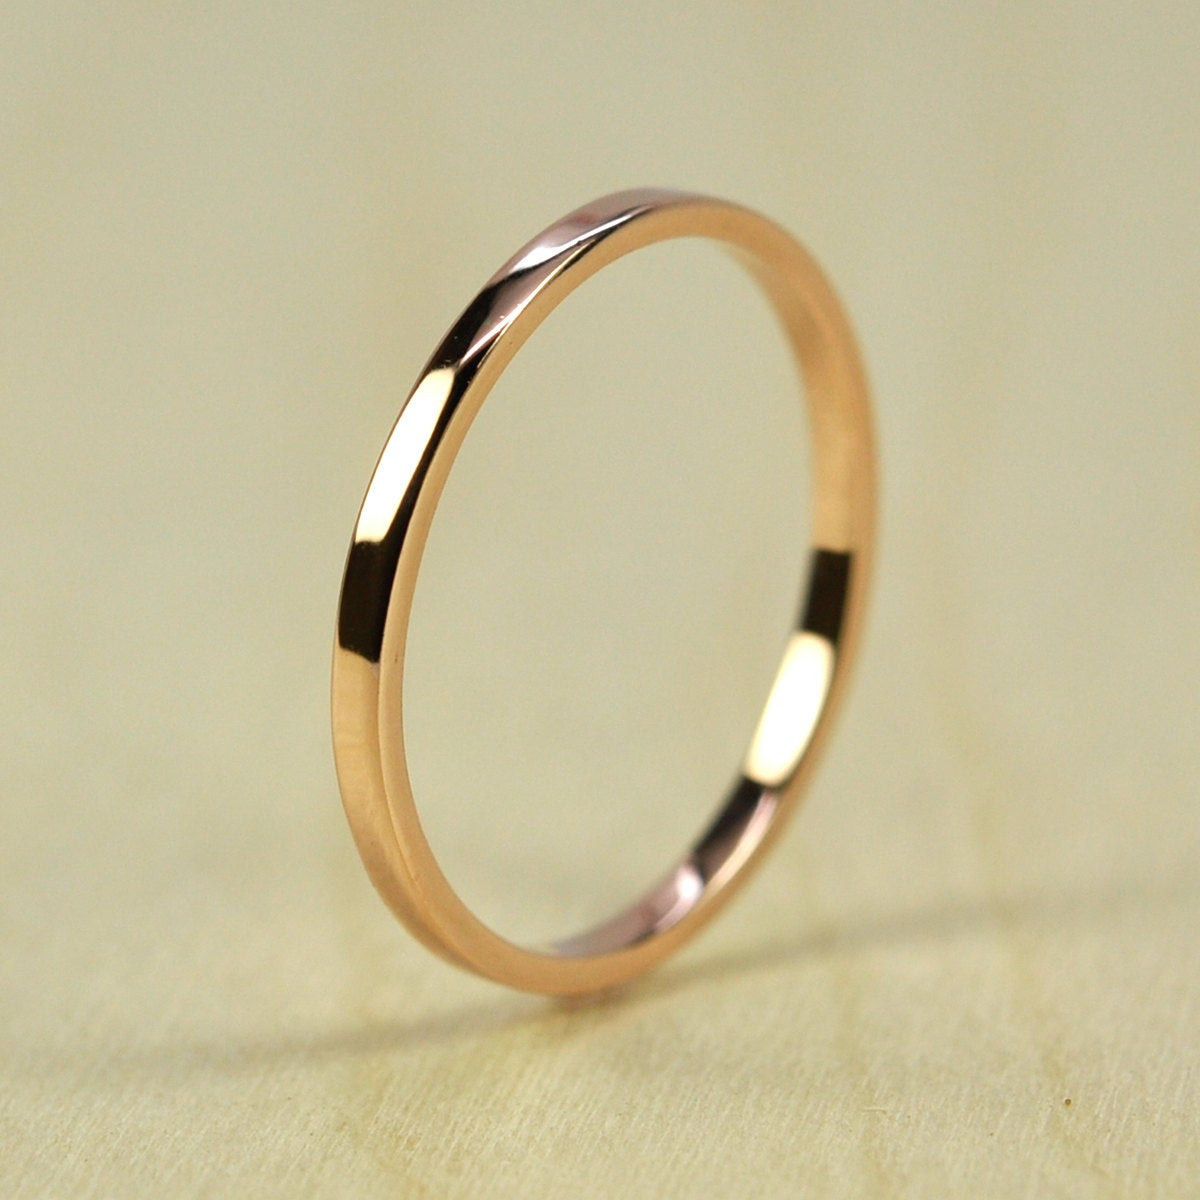 1.5mm Wedding Band
 Rose Gold Wedding Band Skinny Stacking Ring 1 5mm by 1mm